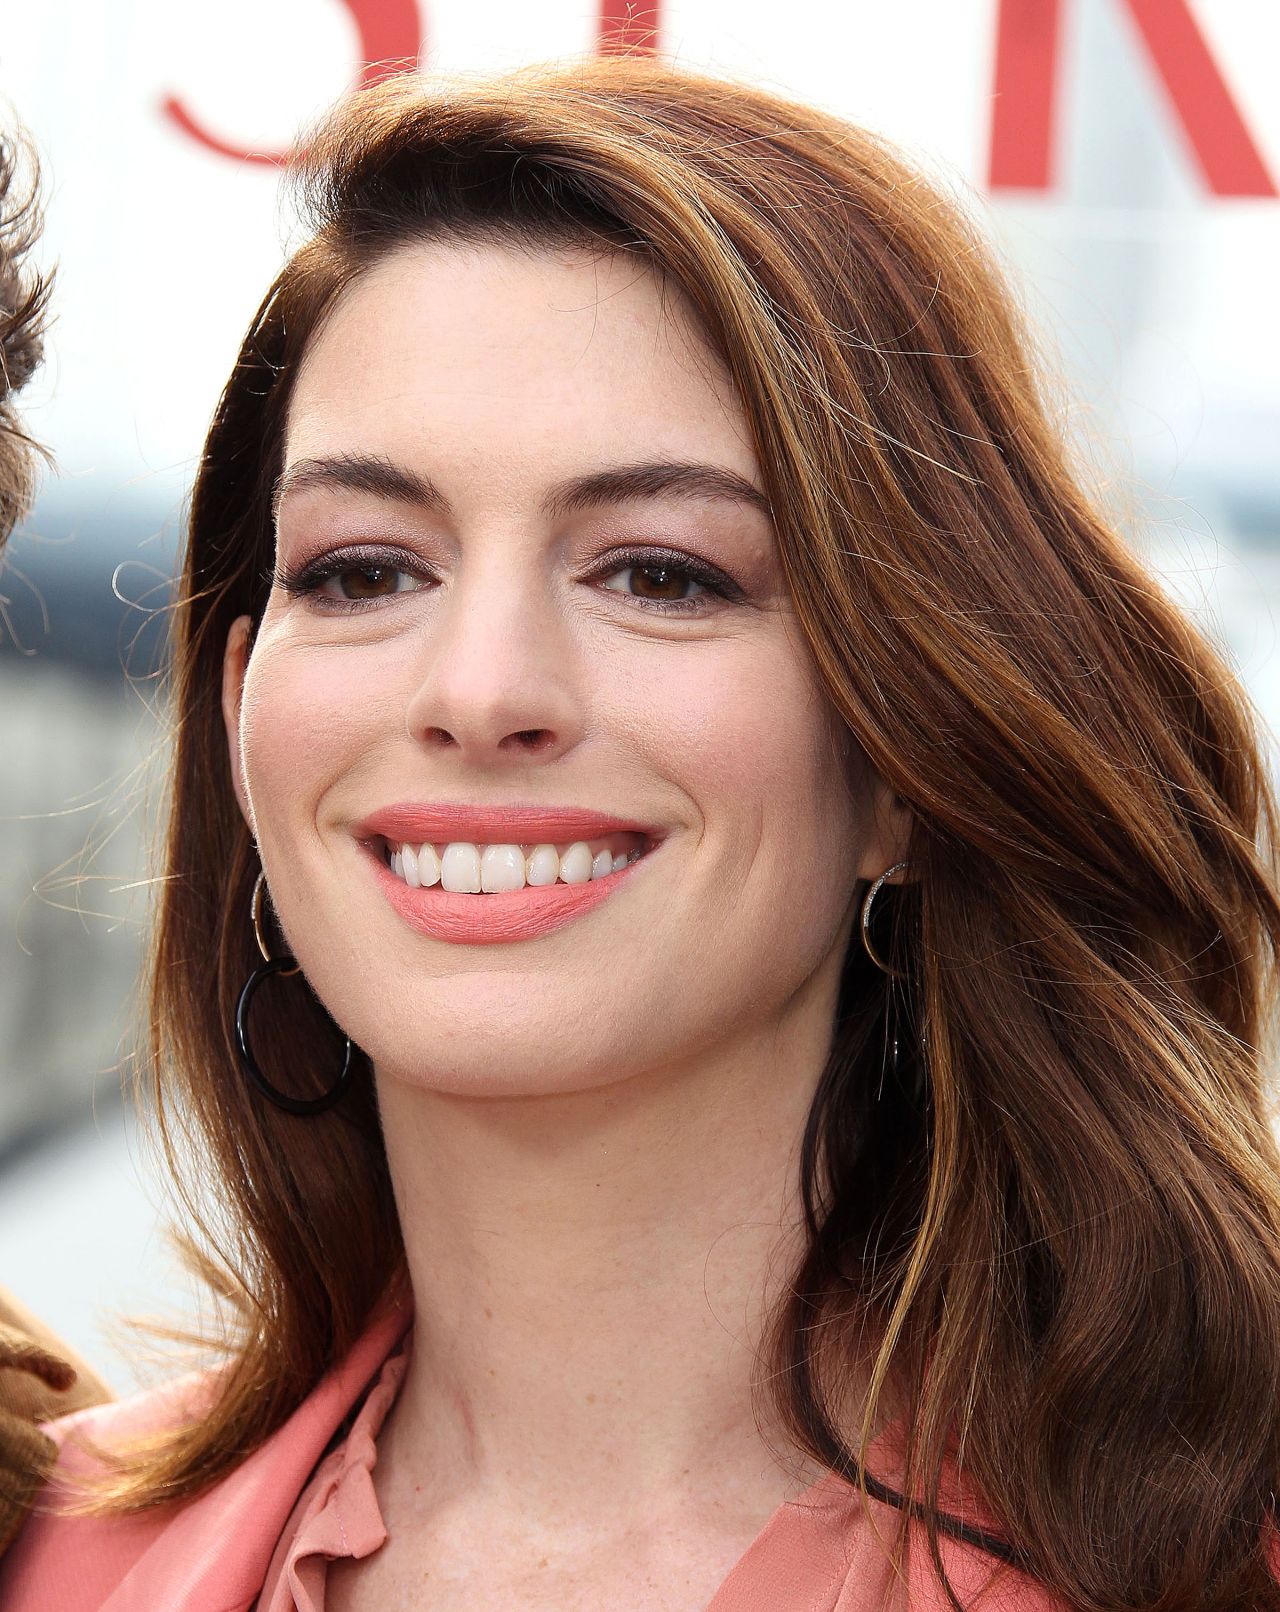 Anne Hathaway - "Serenity" Photo Call in Marina del Rey
